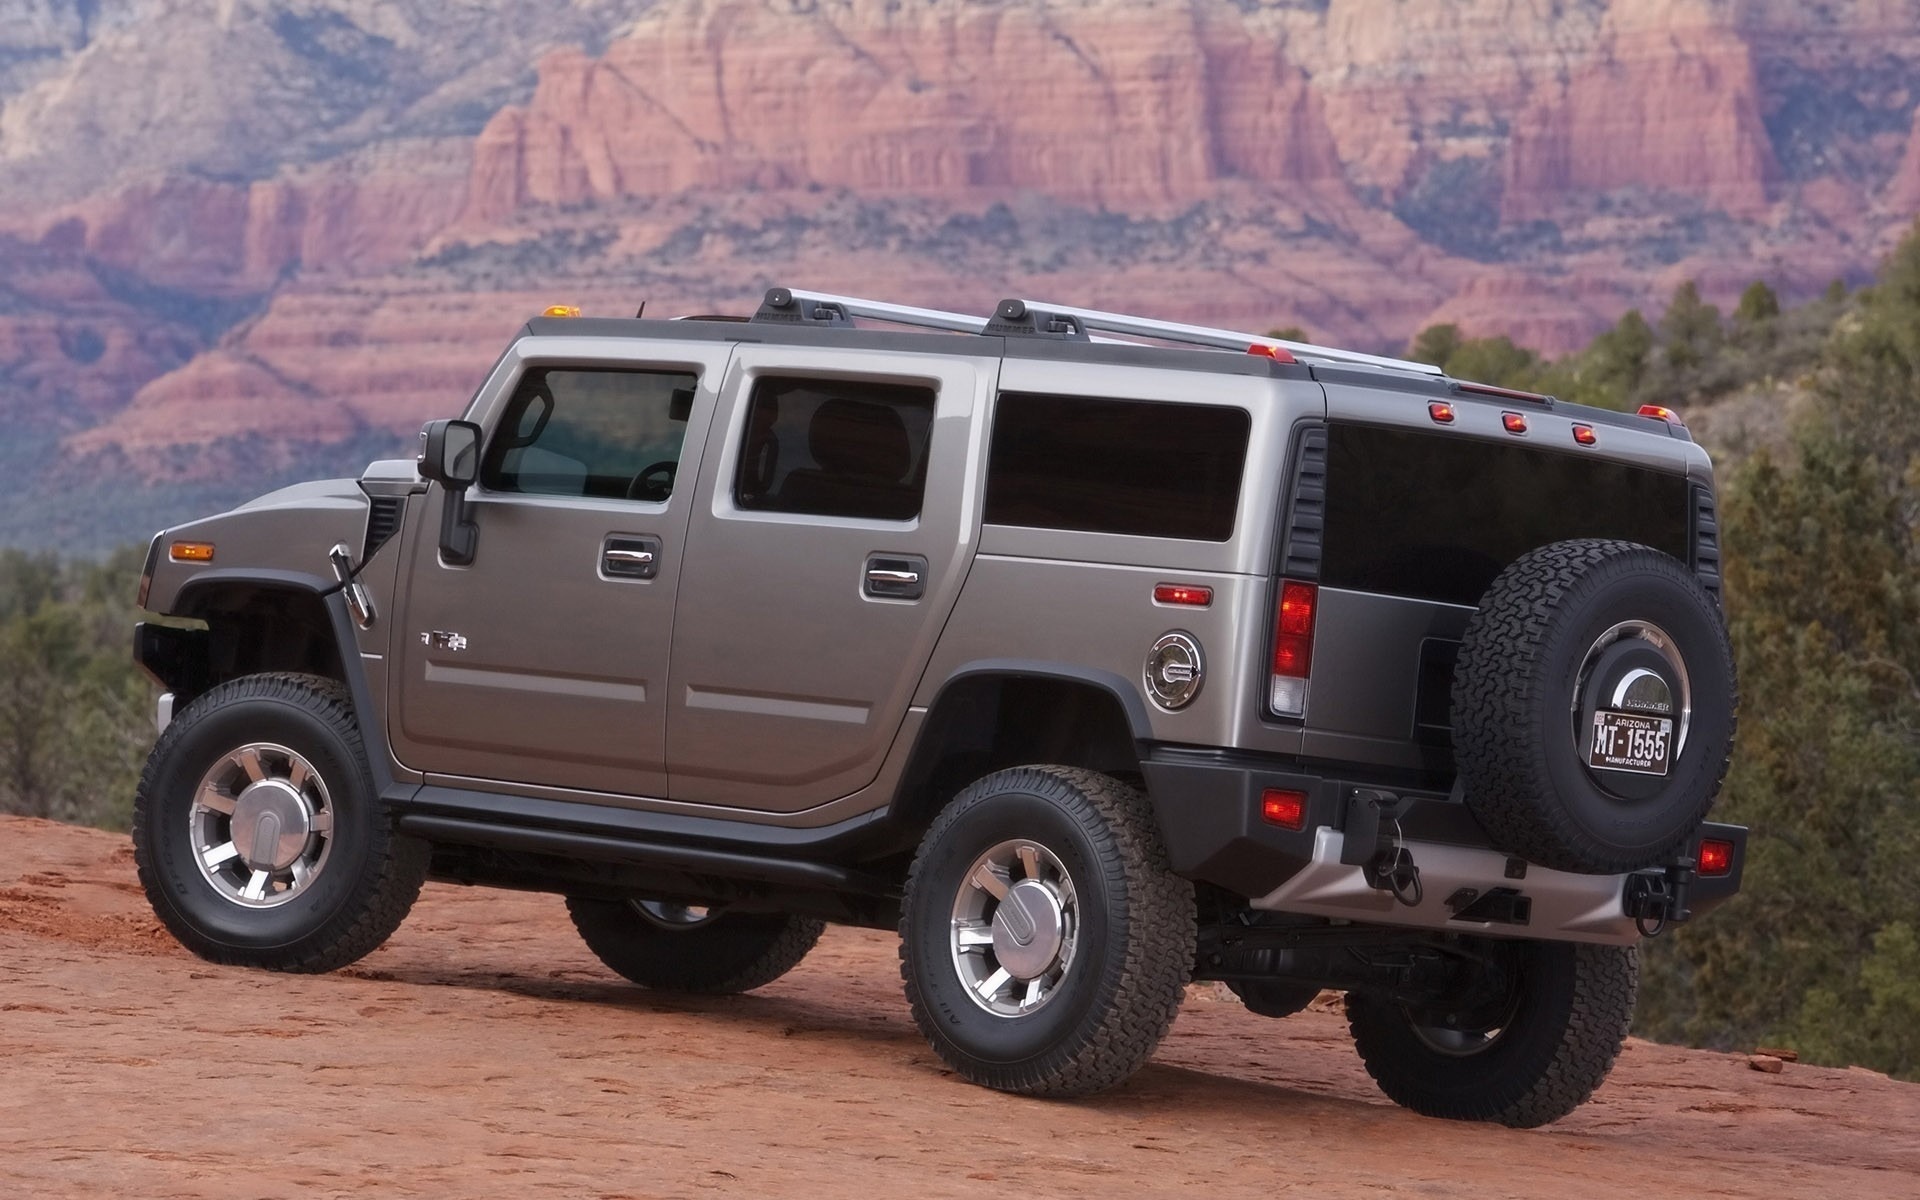 Wallpapers hummer x2 SUV wheels on the desktop